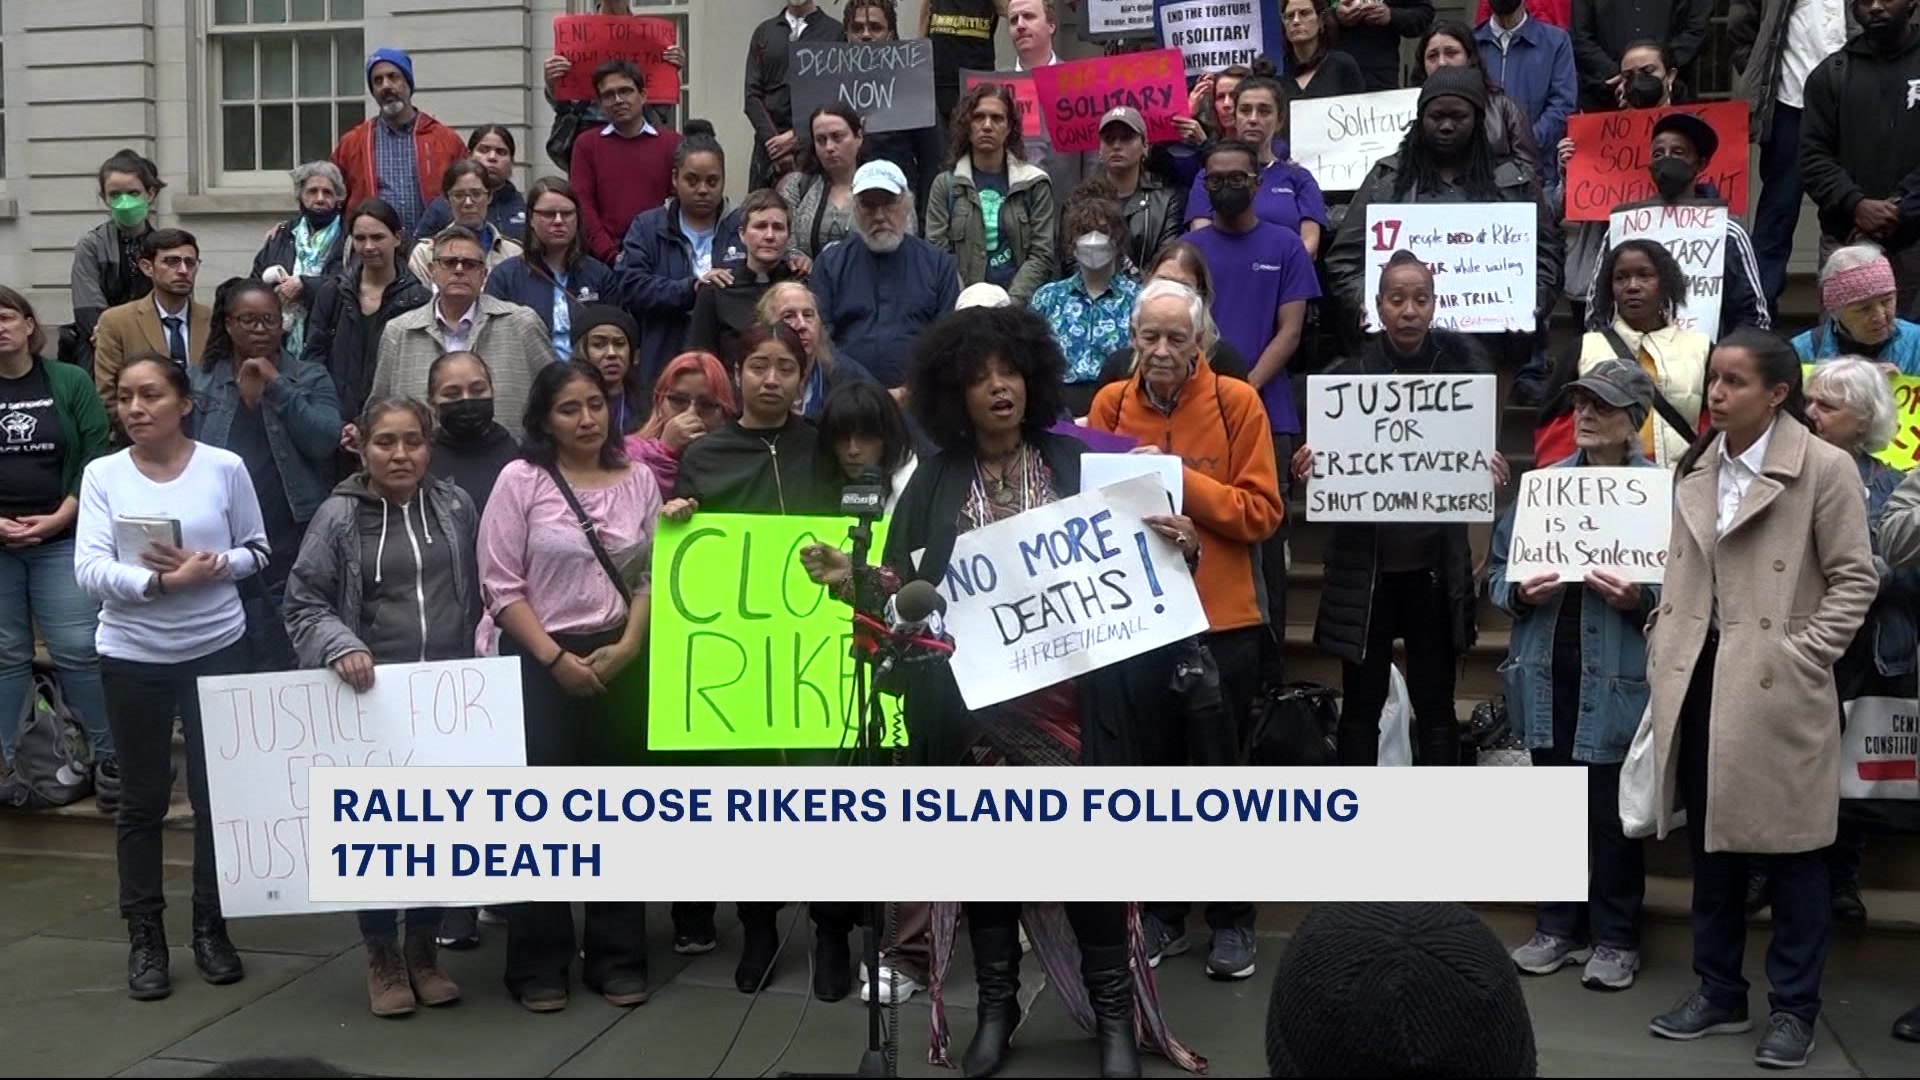 Rally to close Rikers Island held outside City Hall following inmate death over weekend